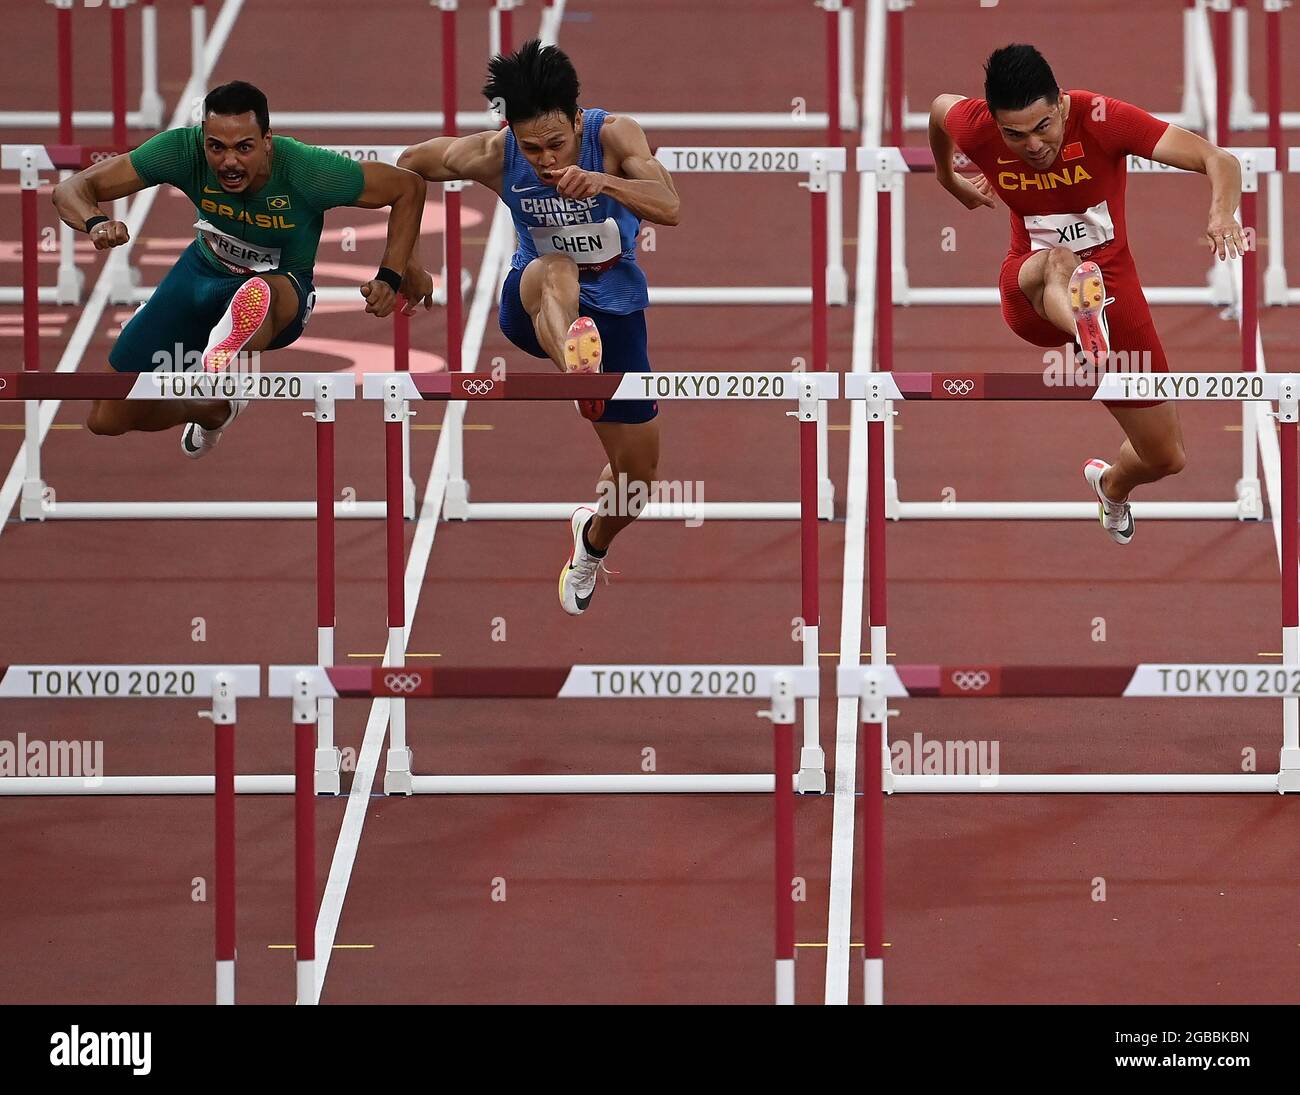 Tokyo, Japan. 3rd Aug, 2021. (from L to R)Rafael Pereira of Brazil, Chen Kuei-Ru of Chinese Taipei and Xie Wenjun of China compete during the Men's 110m Hurdles Heat at the Tokyo 2020 Olympic Games in Tokyo, Japan, Aug. 3, 2021. Credit: Li Yibo/Xinhua/Alamy Live News Stock Photo